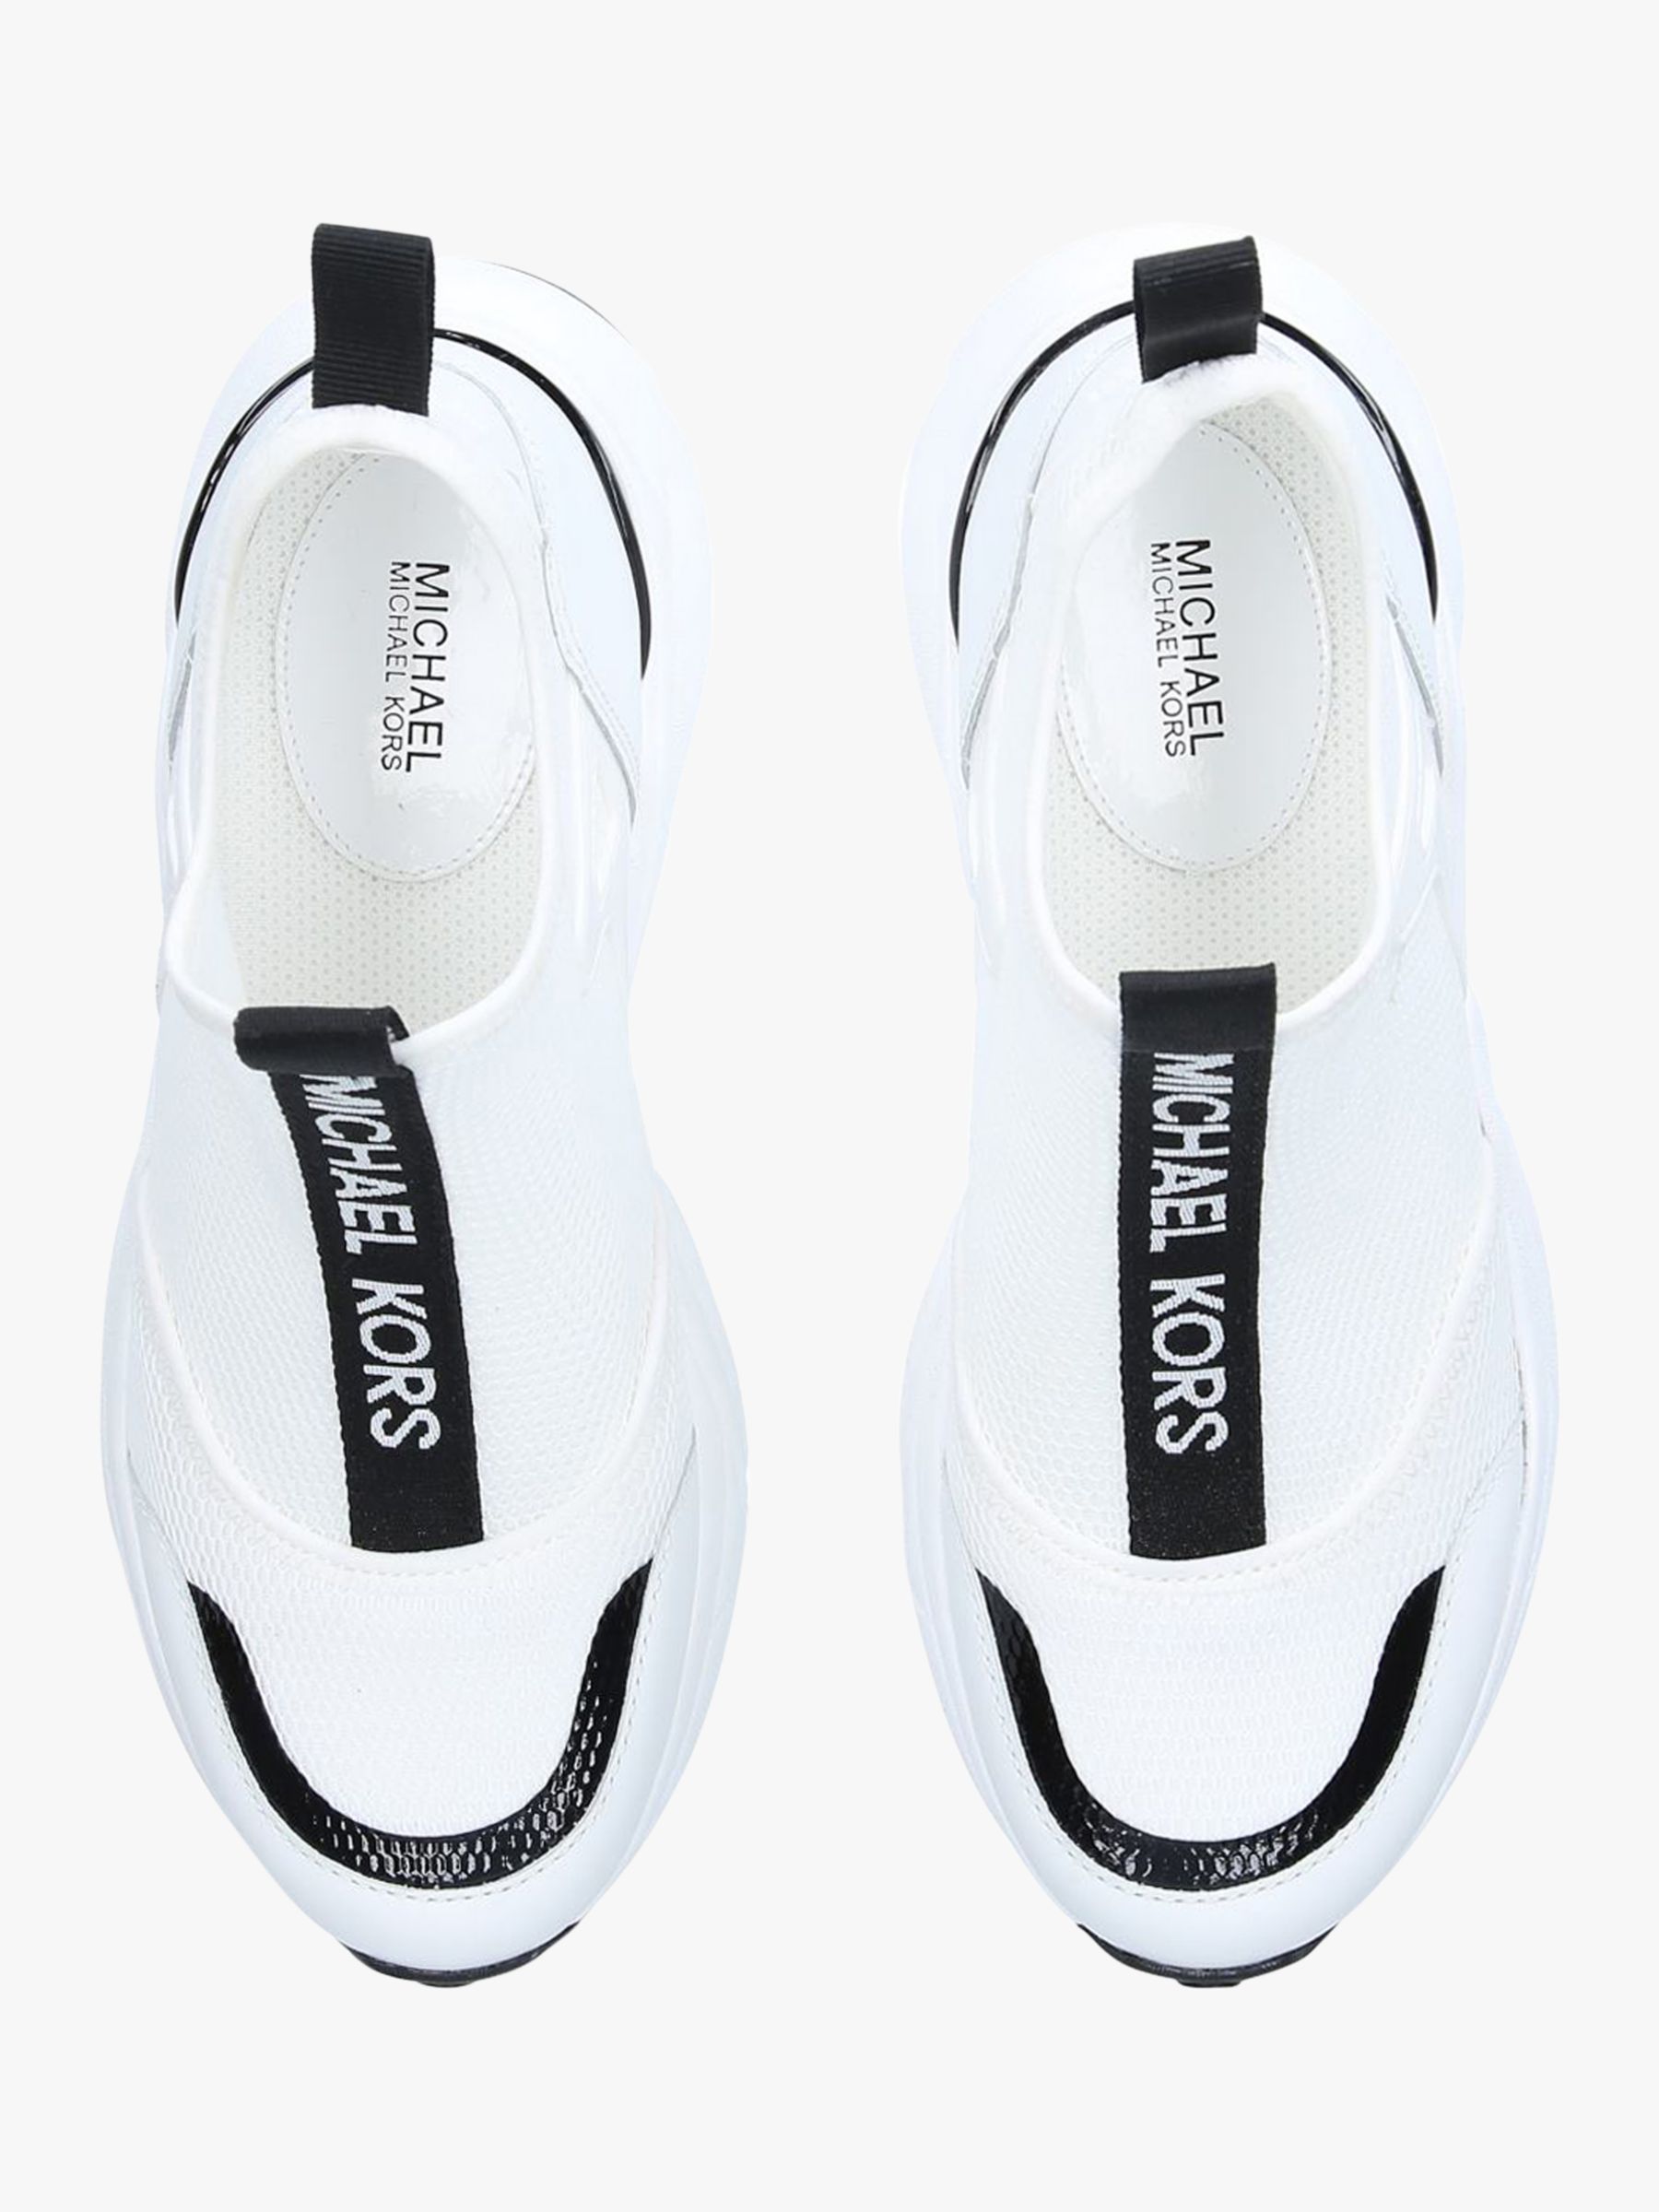 michael kors shoes black and white